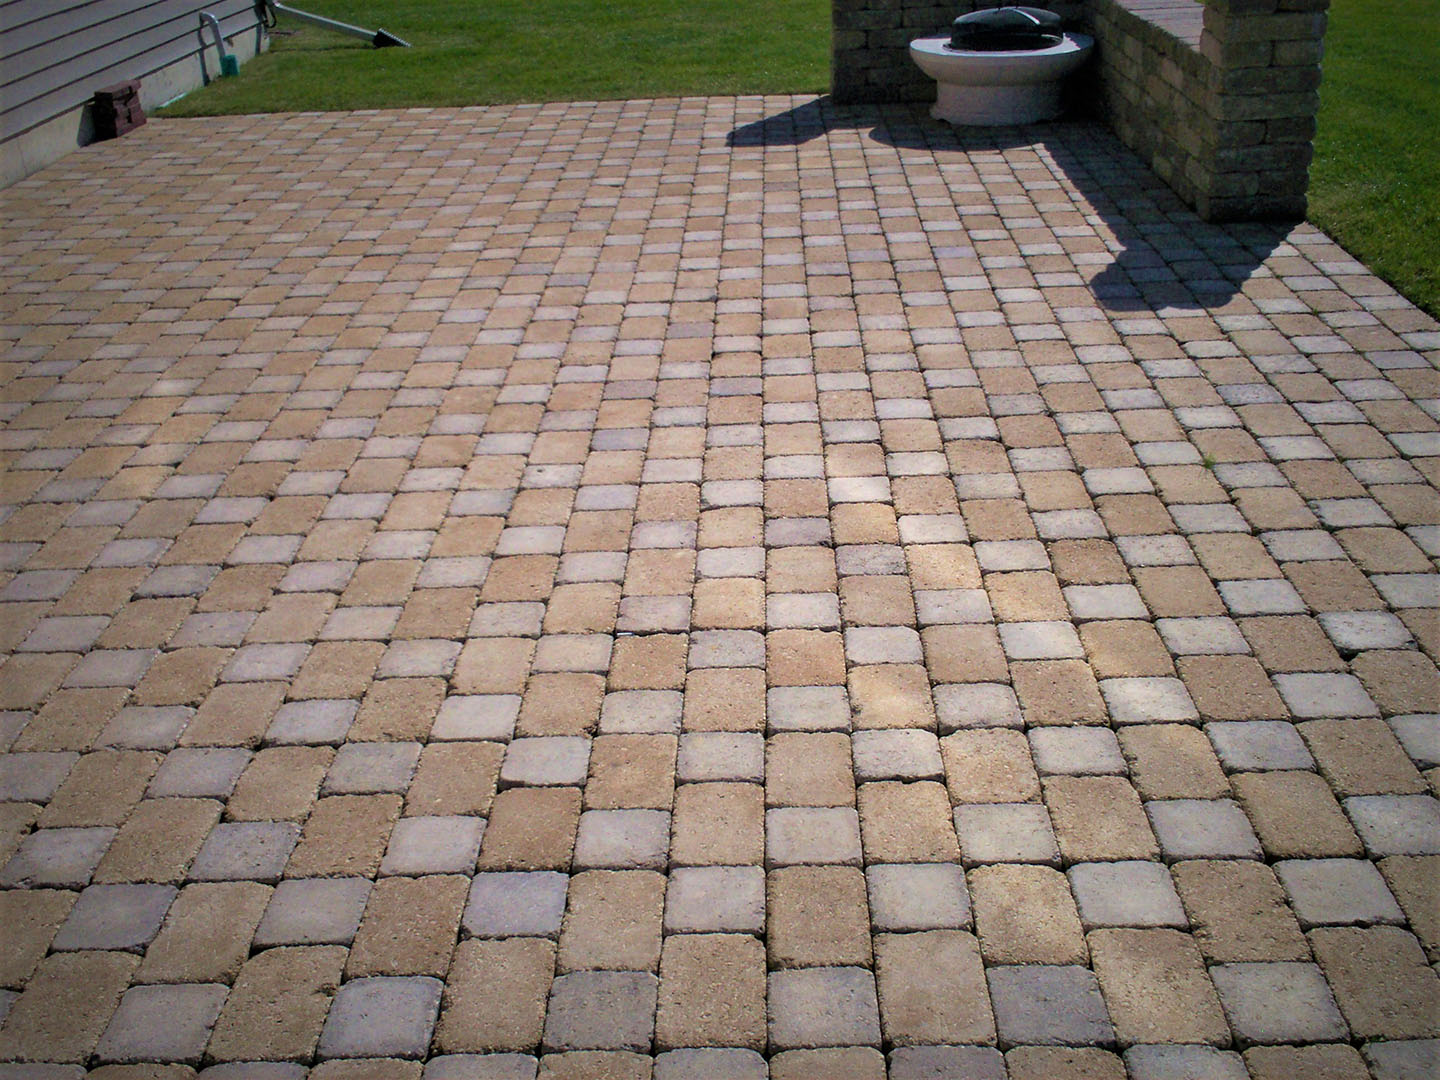 We create all types of hardscapes for outdoor living